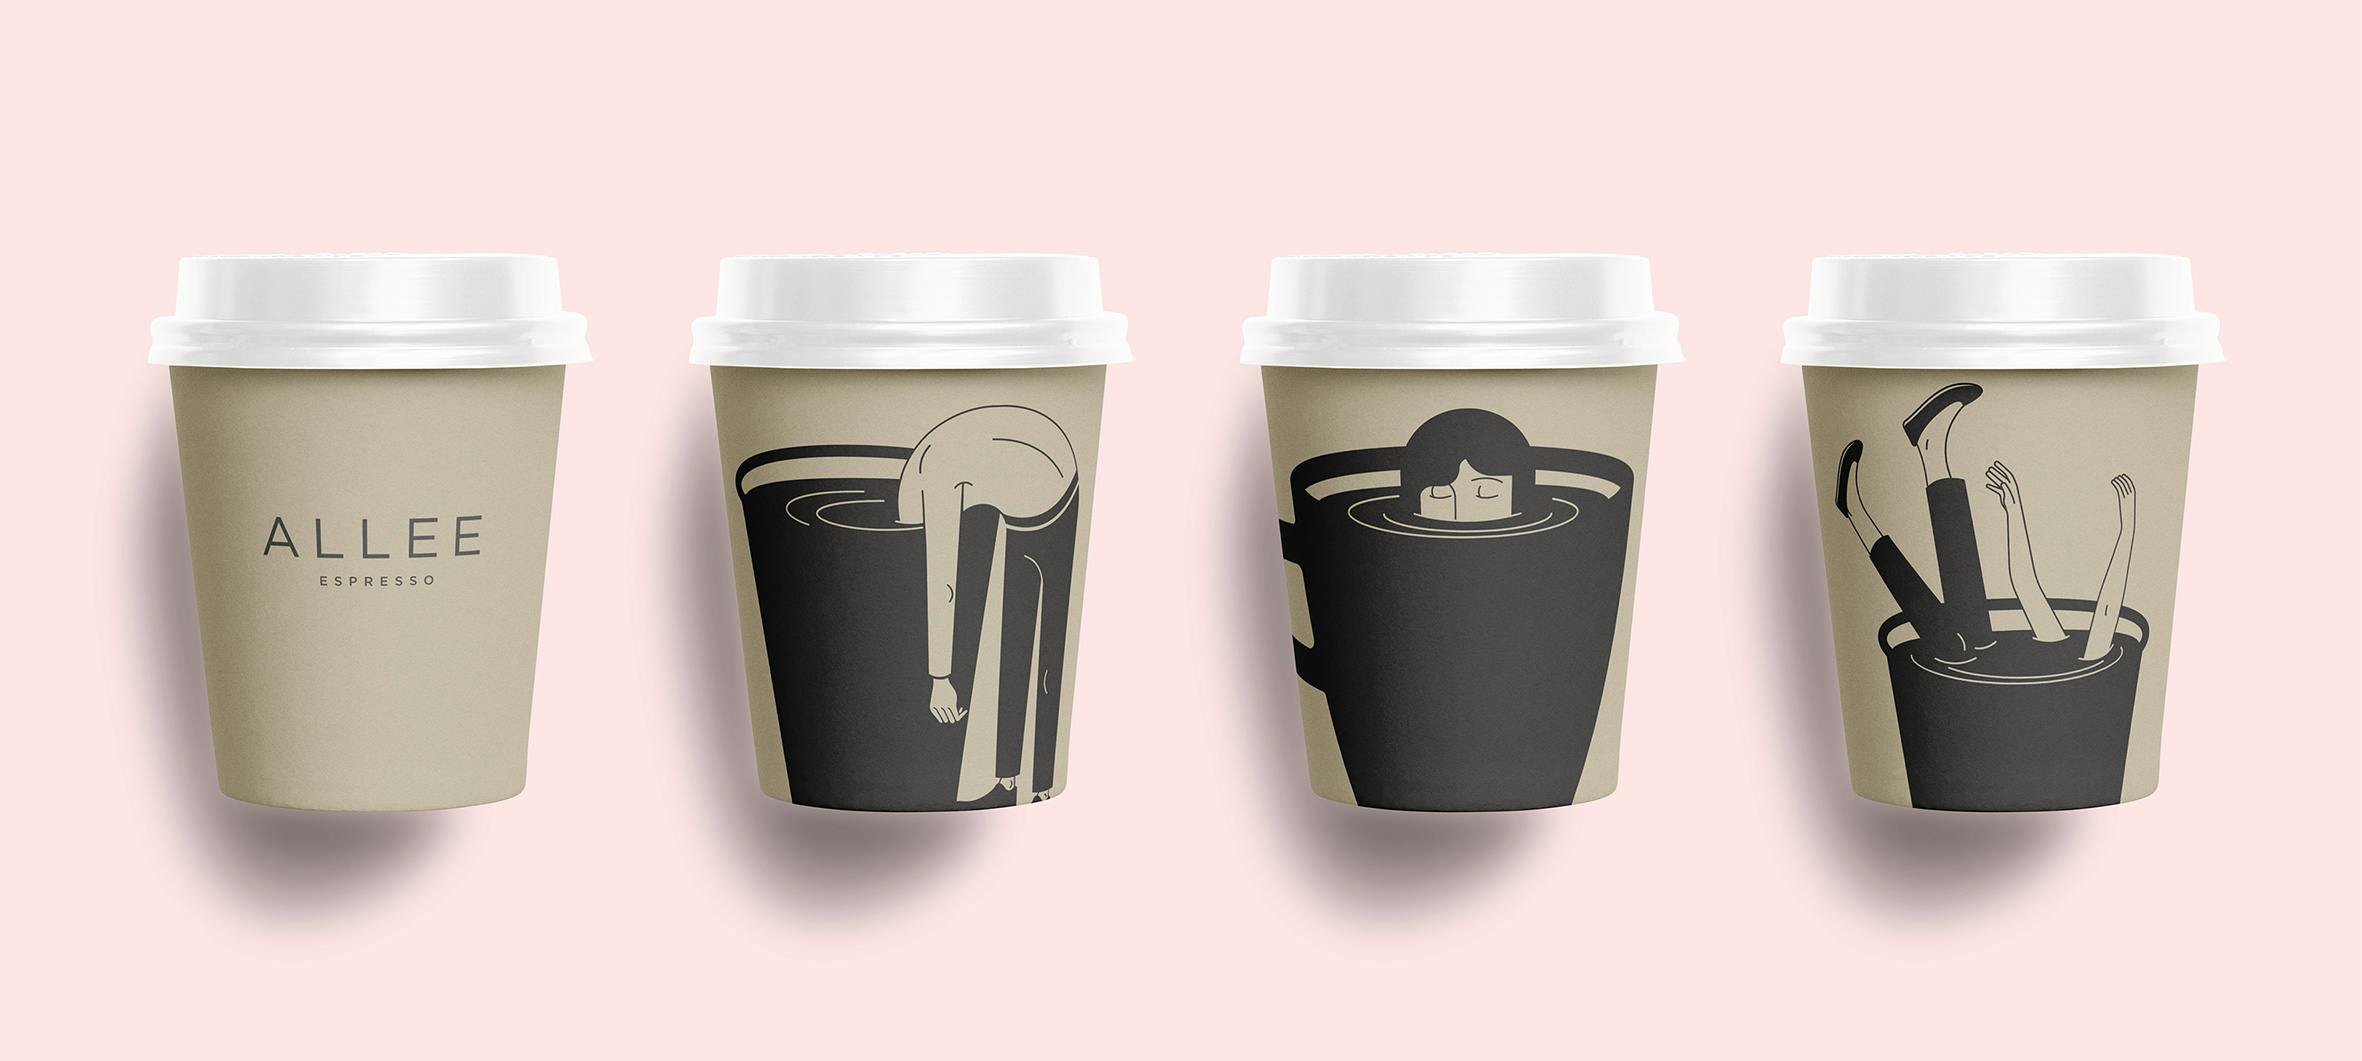 Allee Espresso Illustration Take Away Coffee Cups